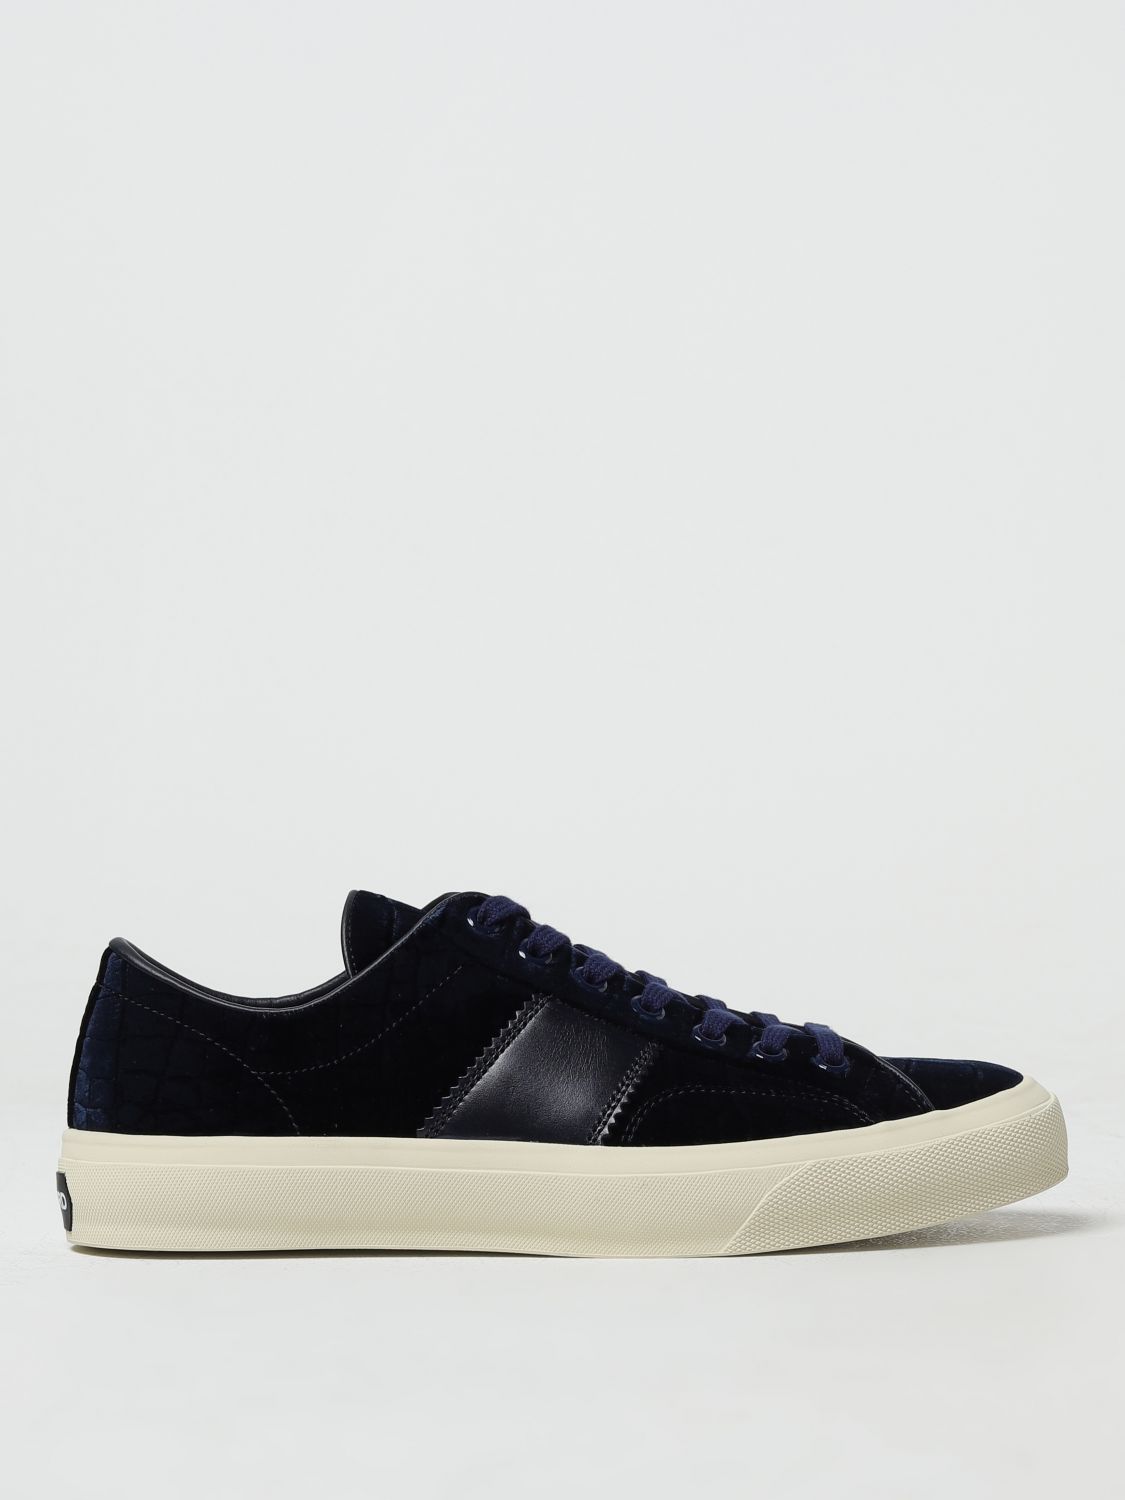 TOM FORD CROCO PRINT VELVET AND LEATHER SNEAKERS,E73177009